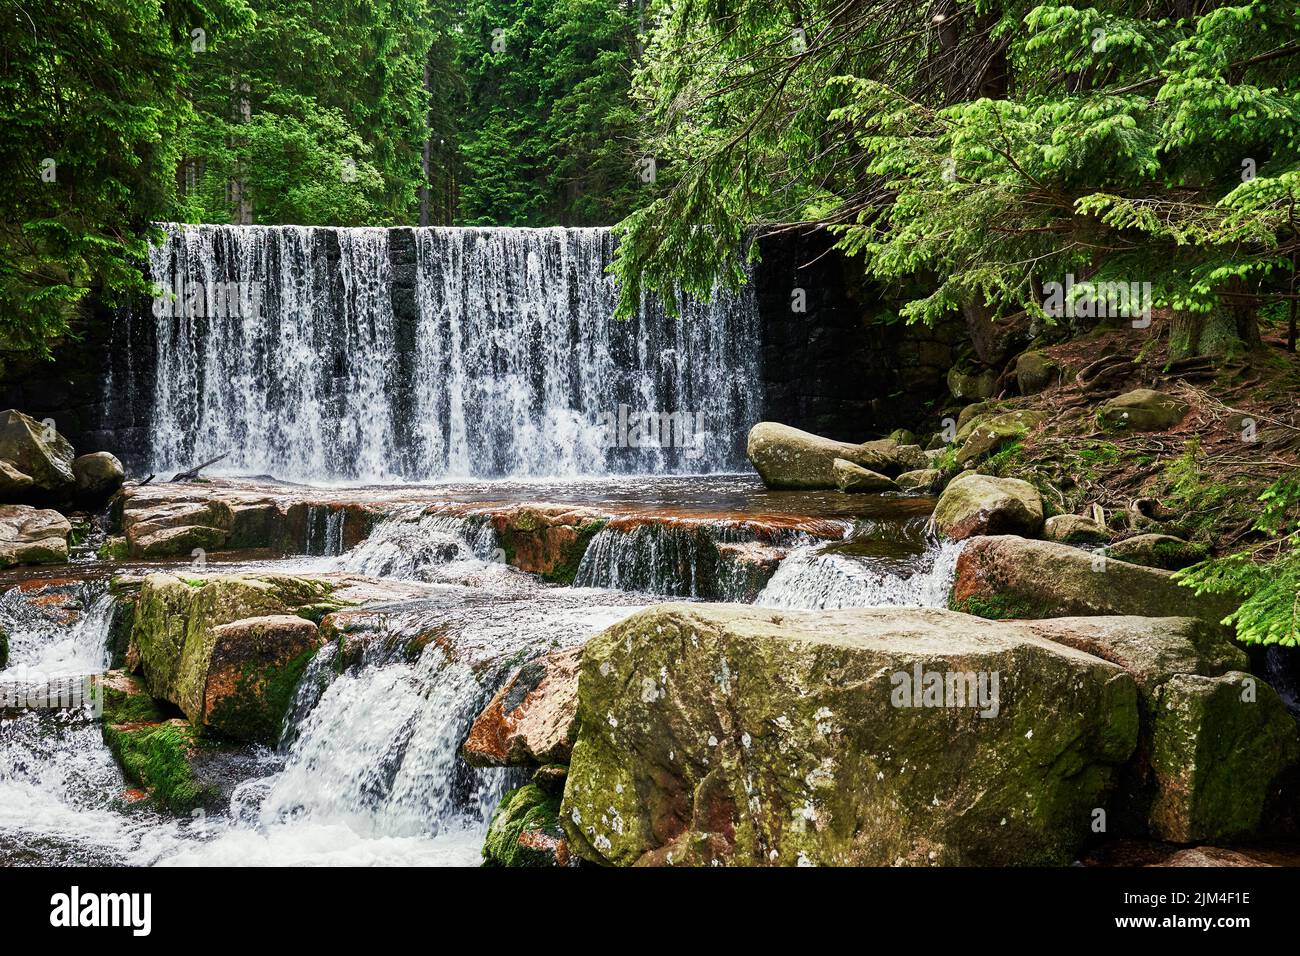 Waterfall on Lomnica river in Karpacz mountains in Poland, Beautiful nature landscape Stock Photo